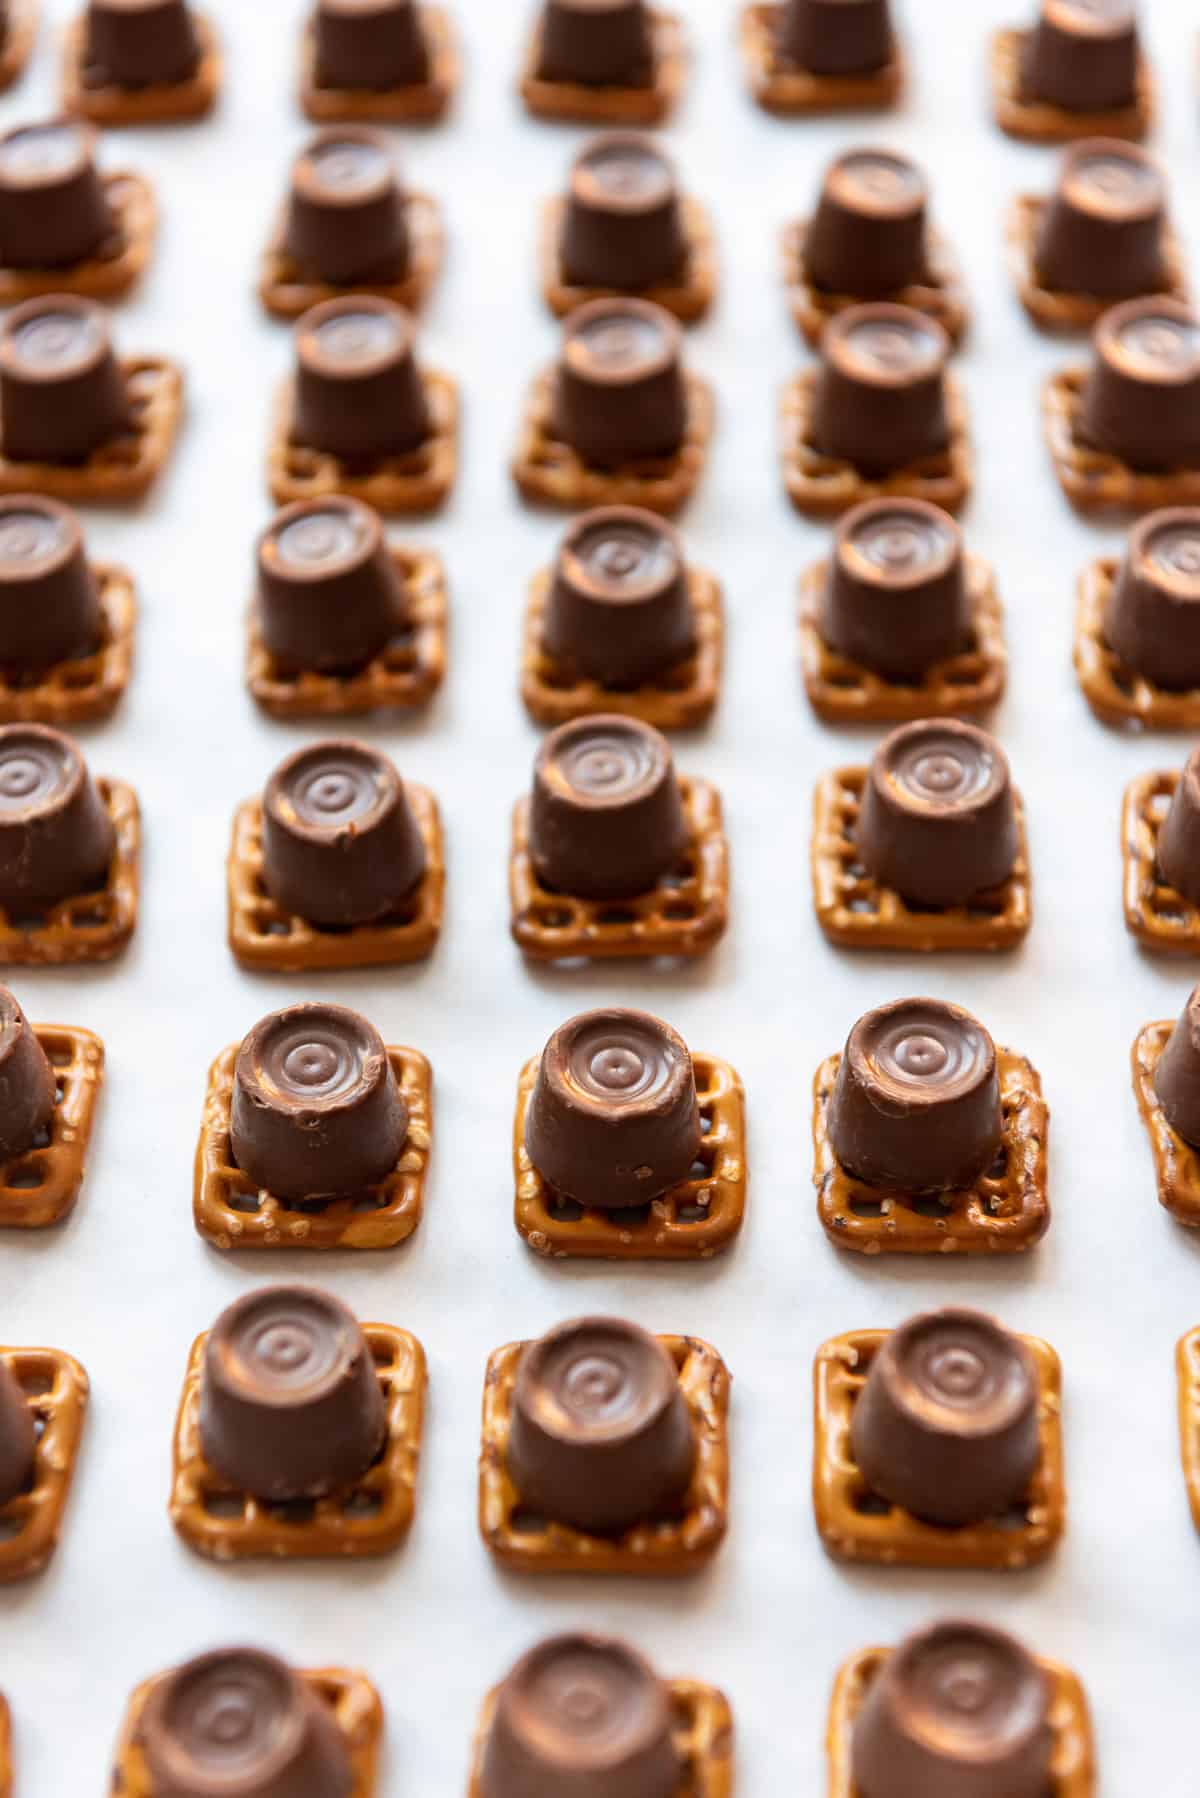 Rows of softened Rolo candies on pretzels.